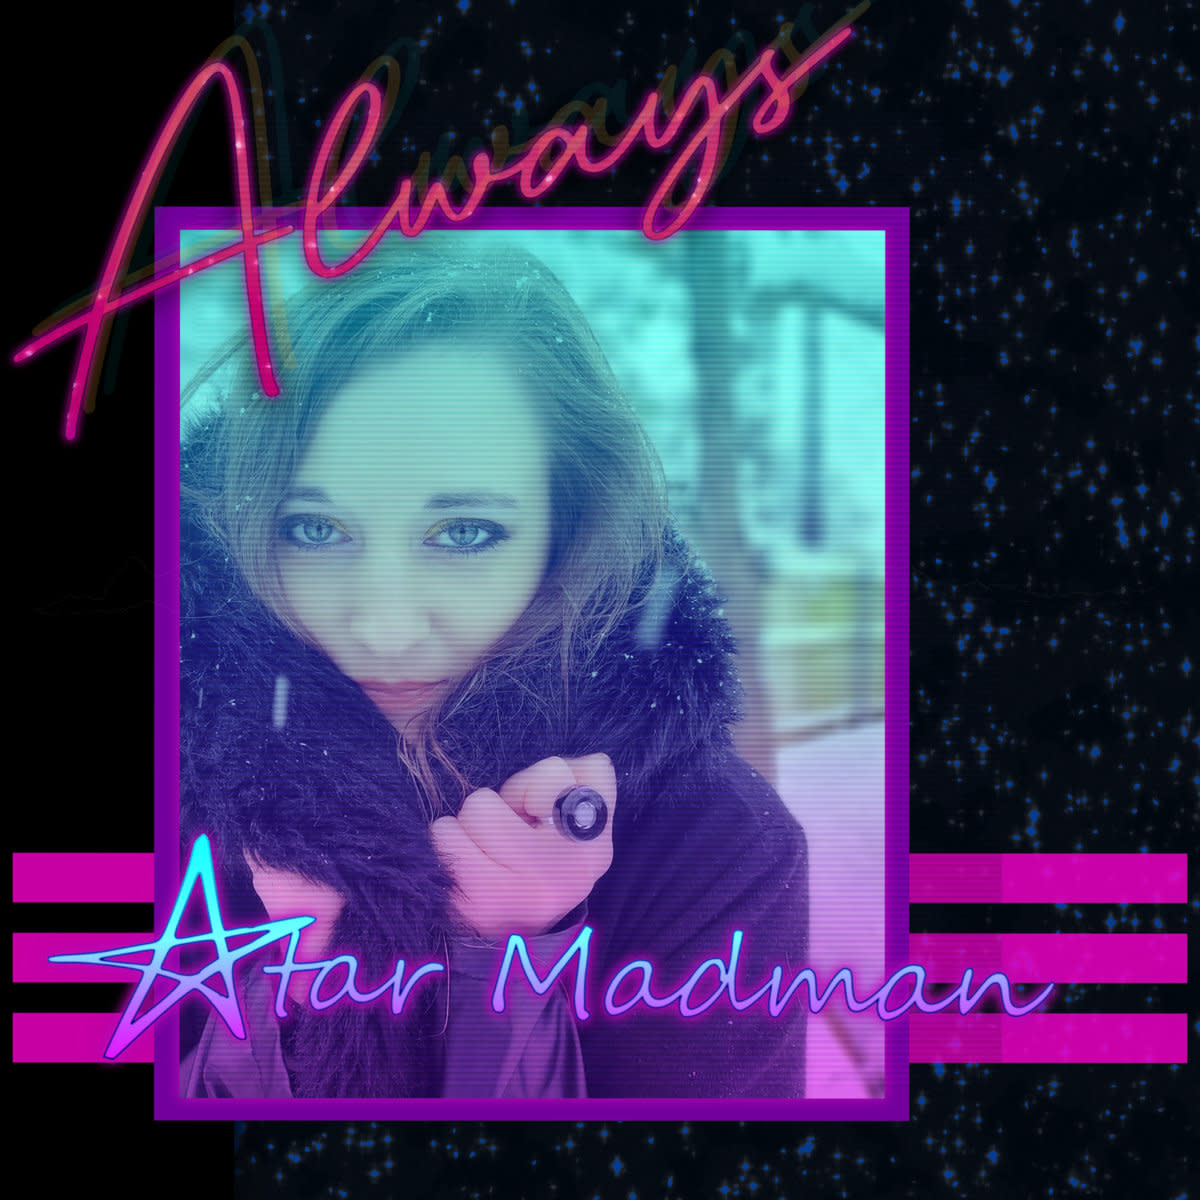 synthpop-single-review-always-by-star-madman